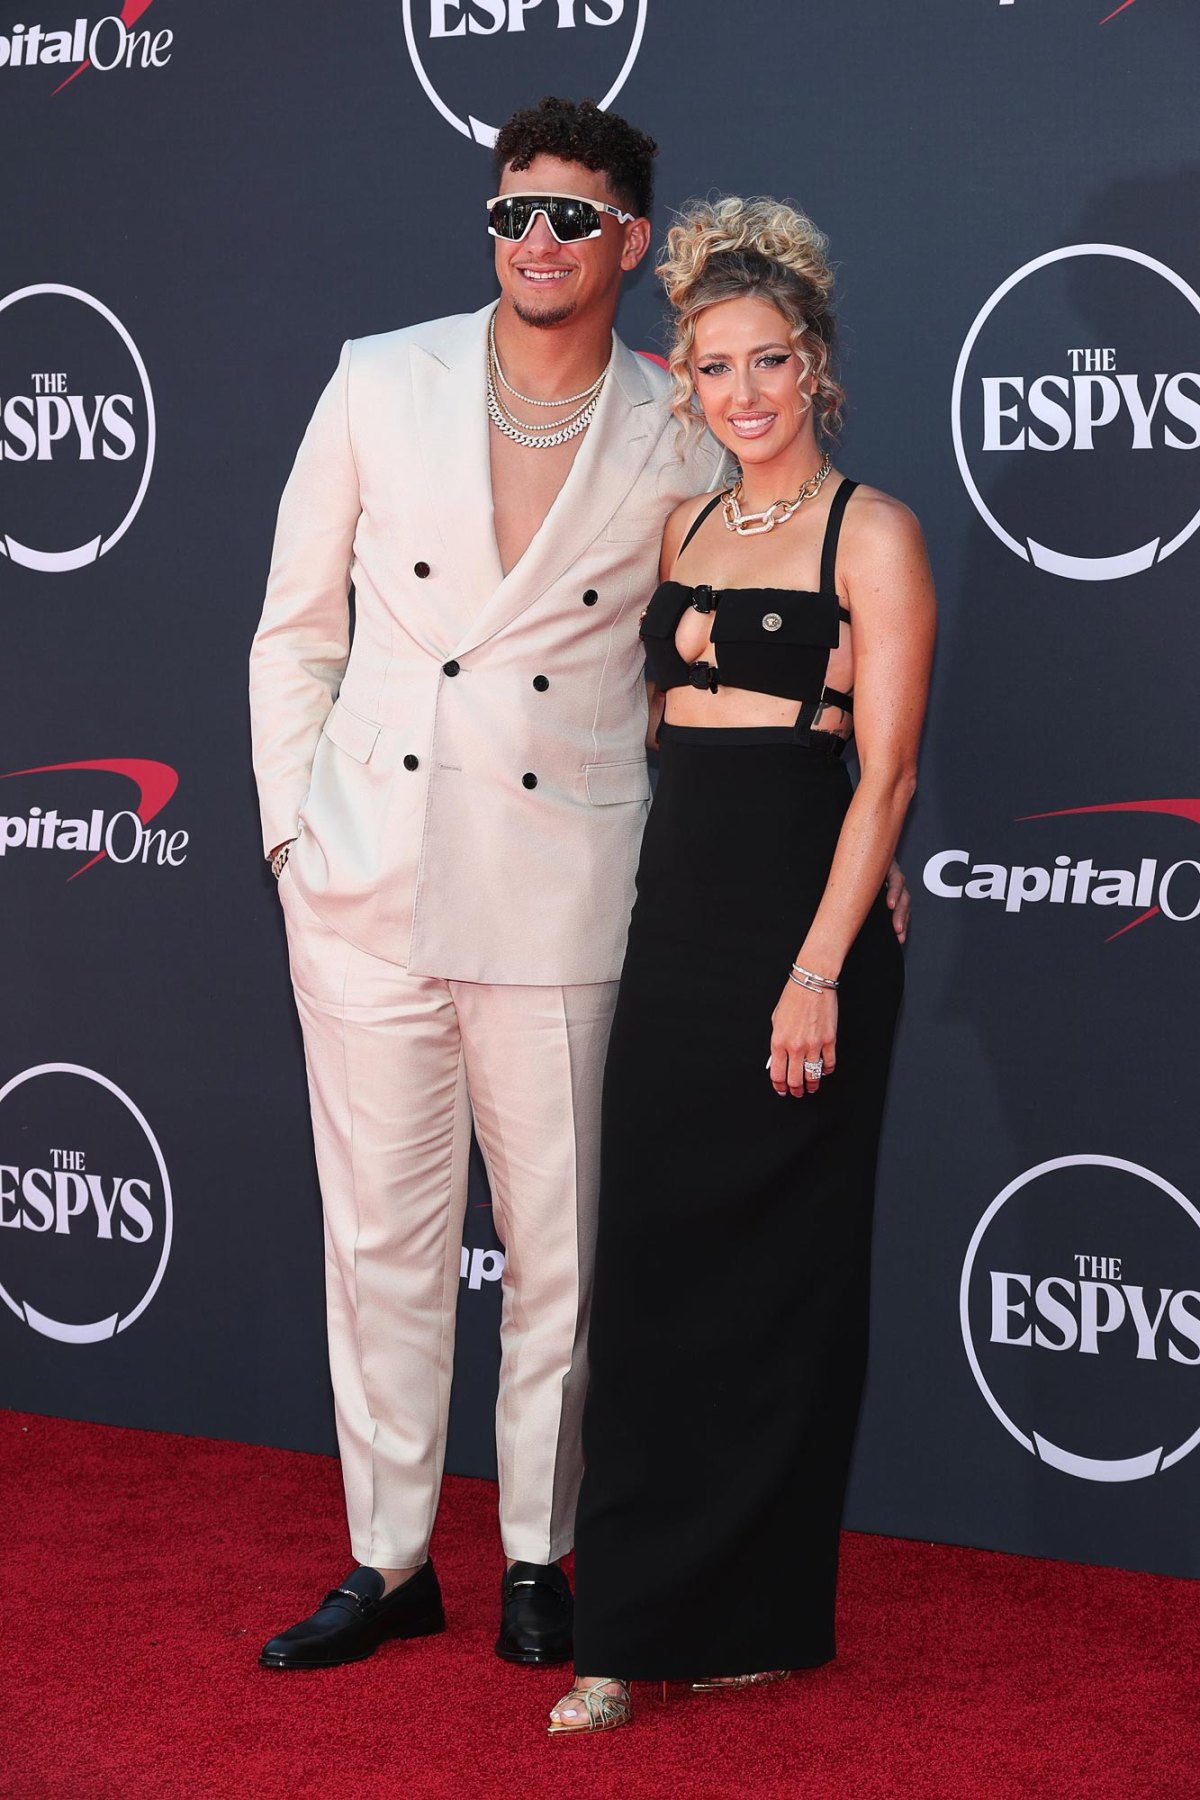 LOOK: Patrick Mahomes Shows off Stylish Suit in Arizona